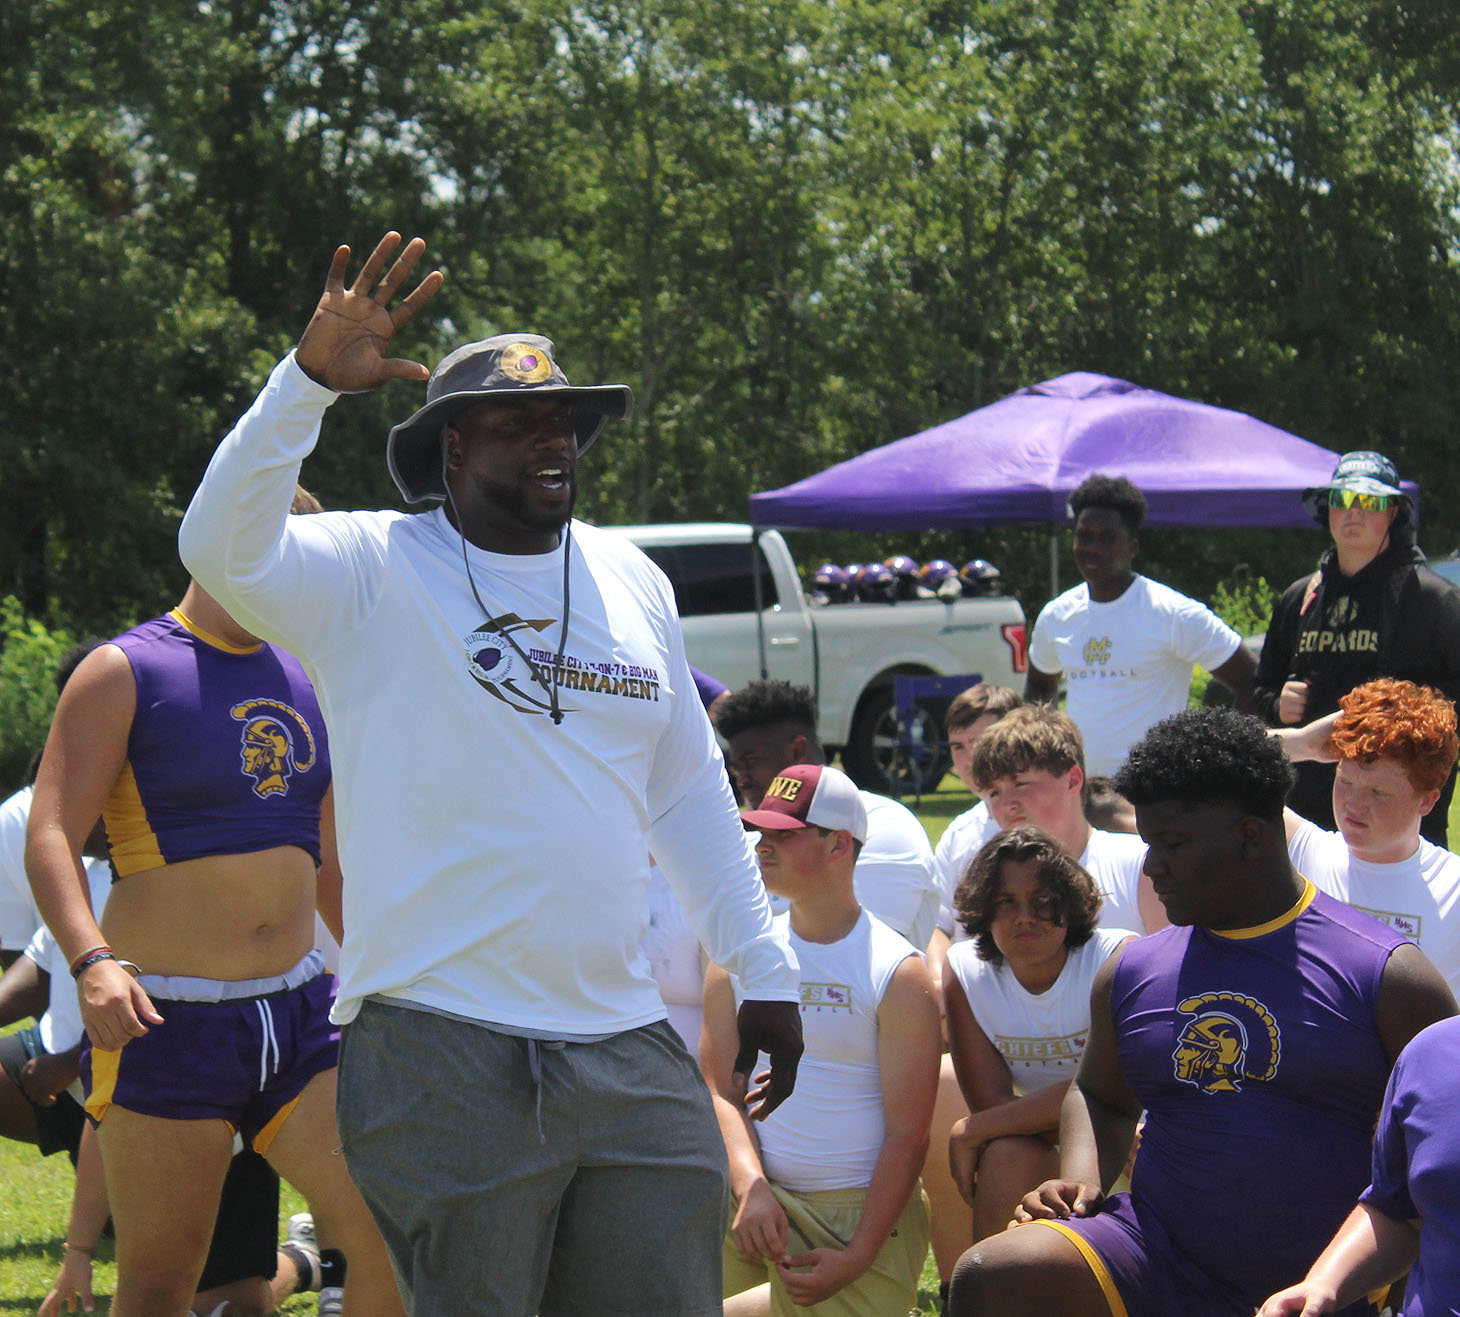 Daphne Head Coach Kenny King lays down the ground rules for the obstacle course portion of the Big Man Tournament at the Al Trione Sports Complex July 14.